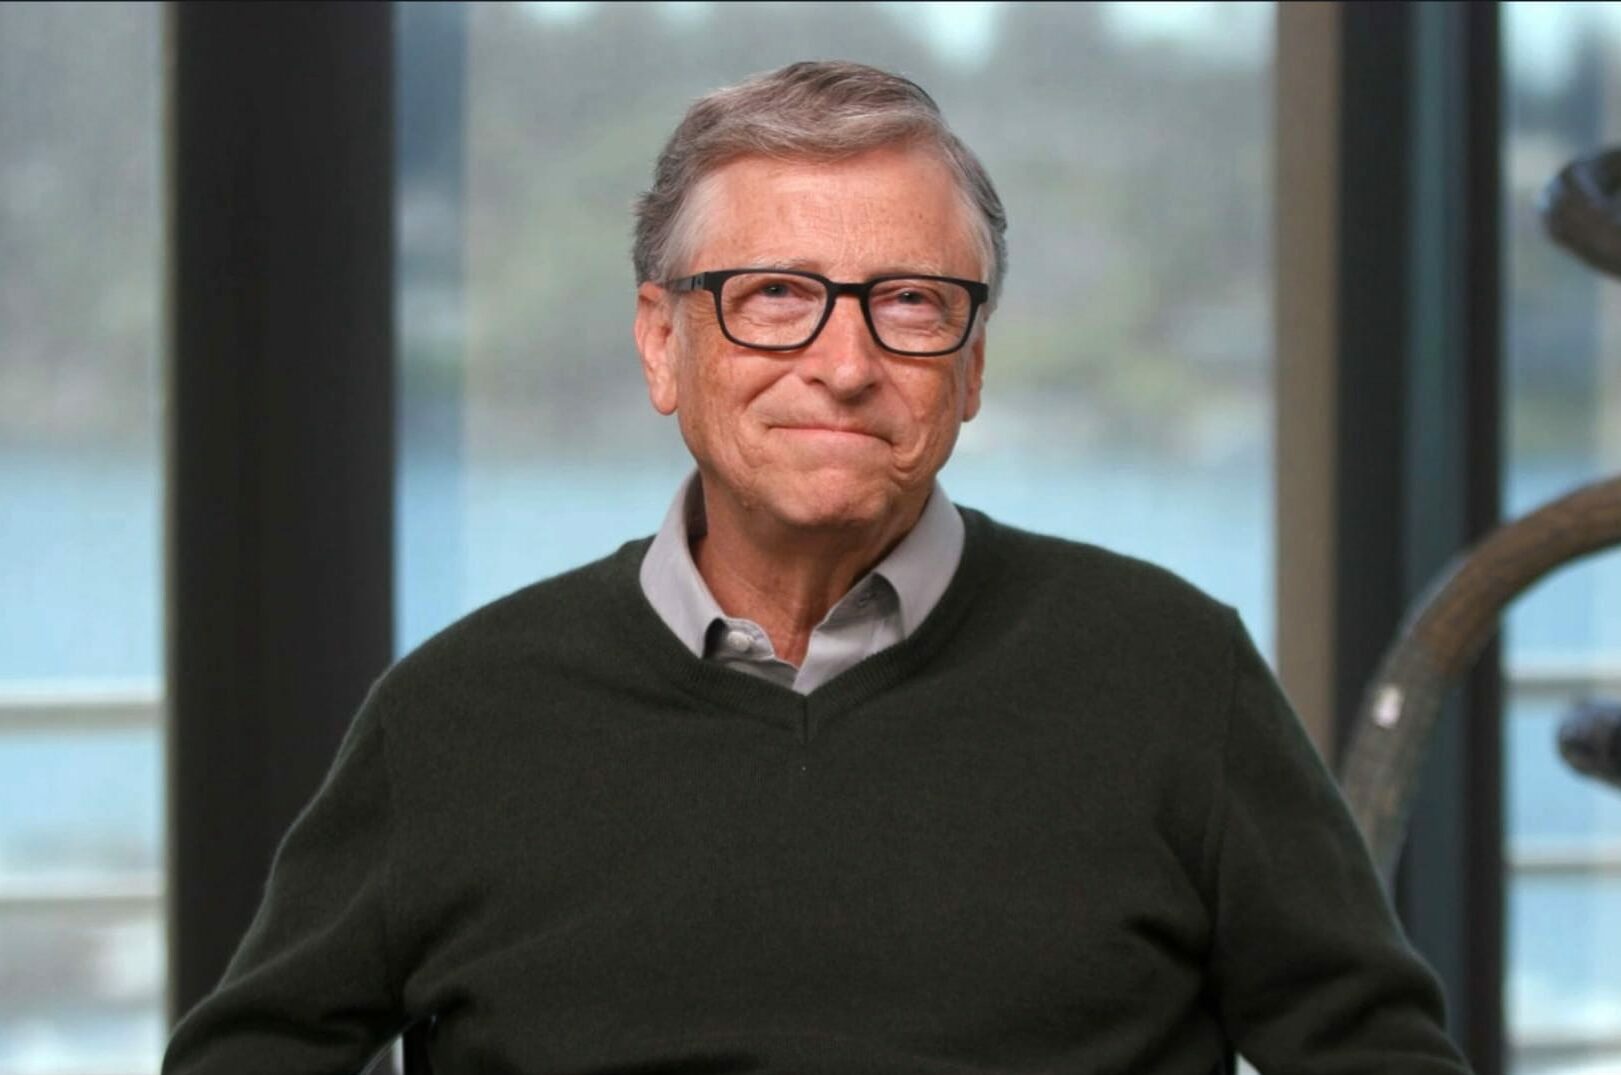 Bill Gates affair with Microsoft staff and friendship with Jeffrey Epstein casts long shadow